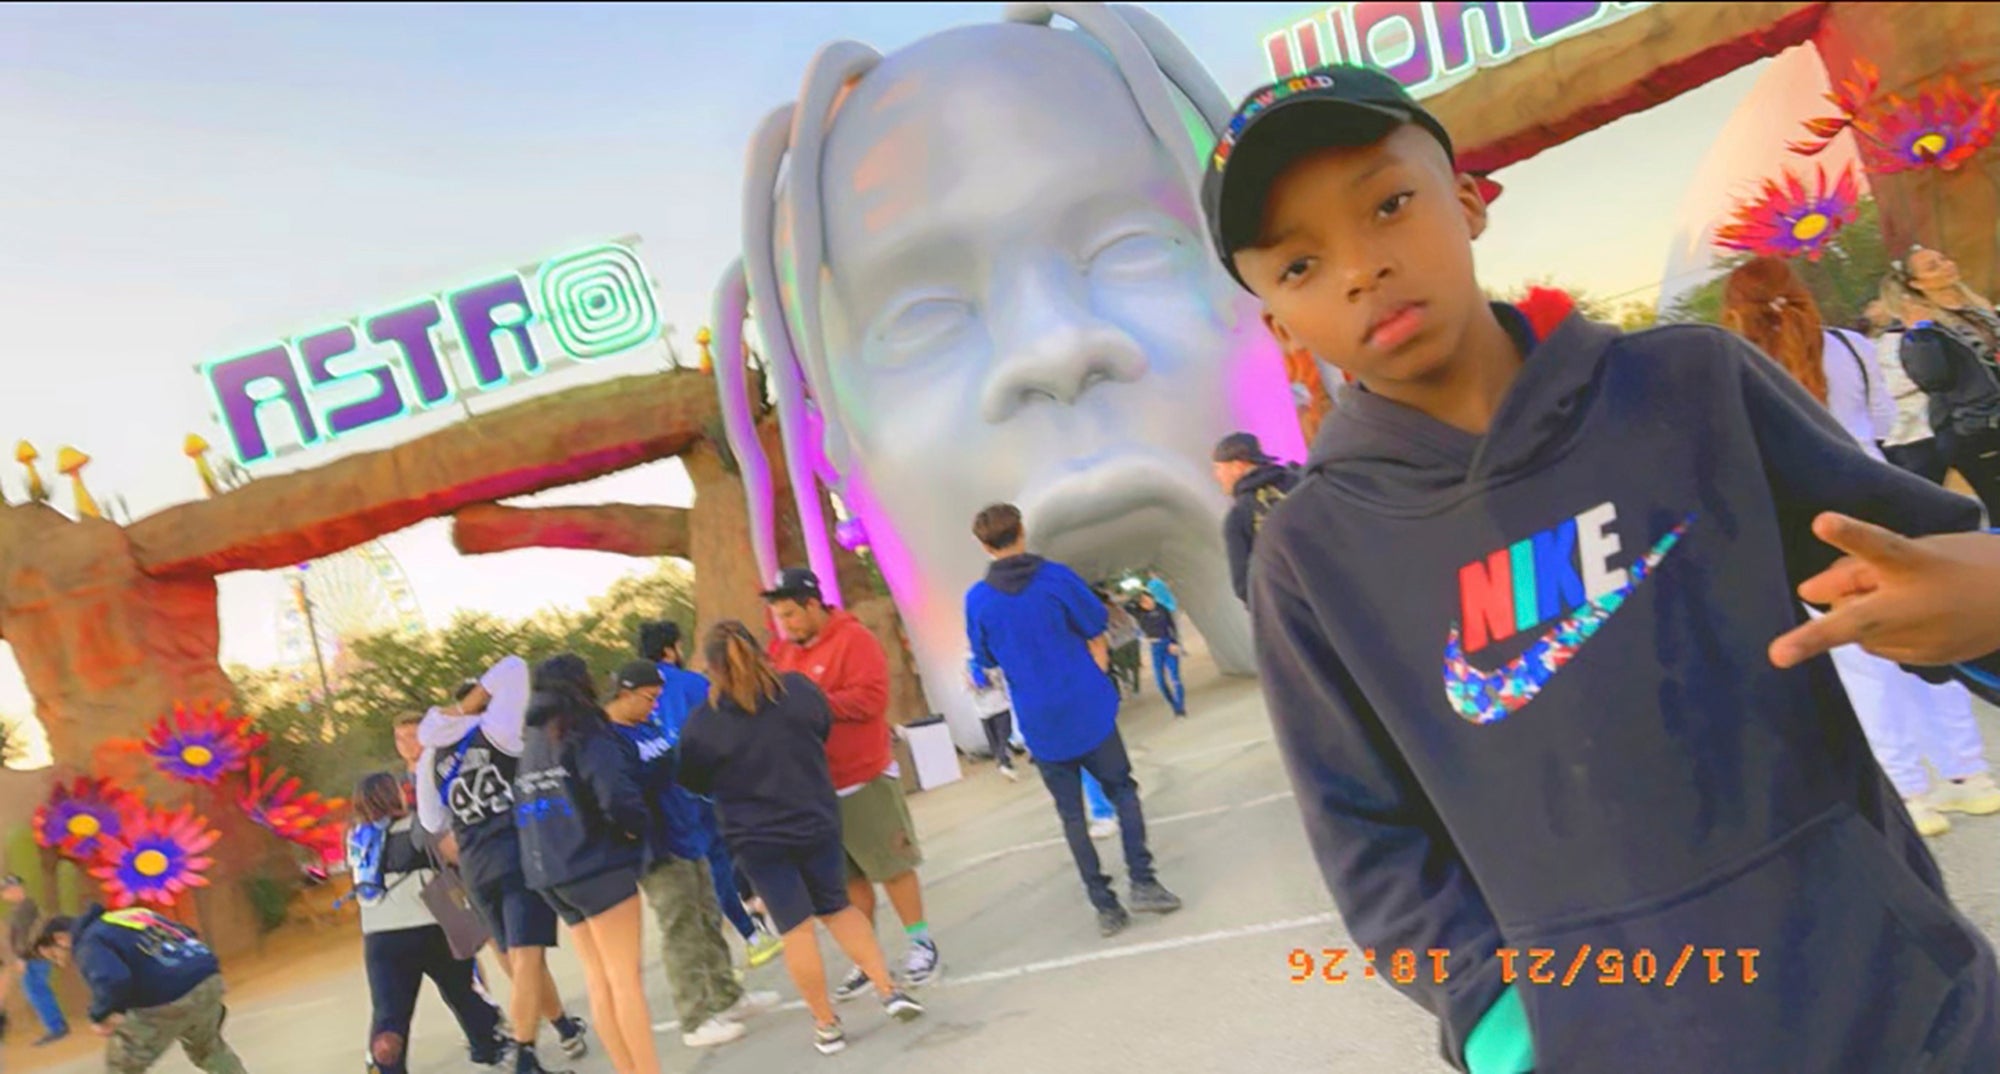 Nine-year-old Ezra Blount poses outside the Astroworld music festival in Houston